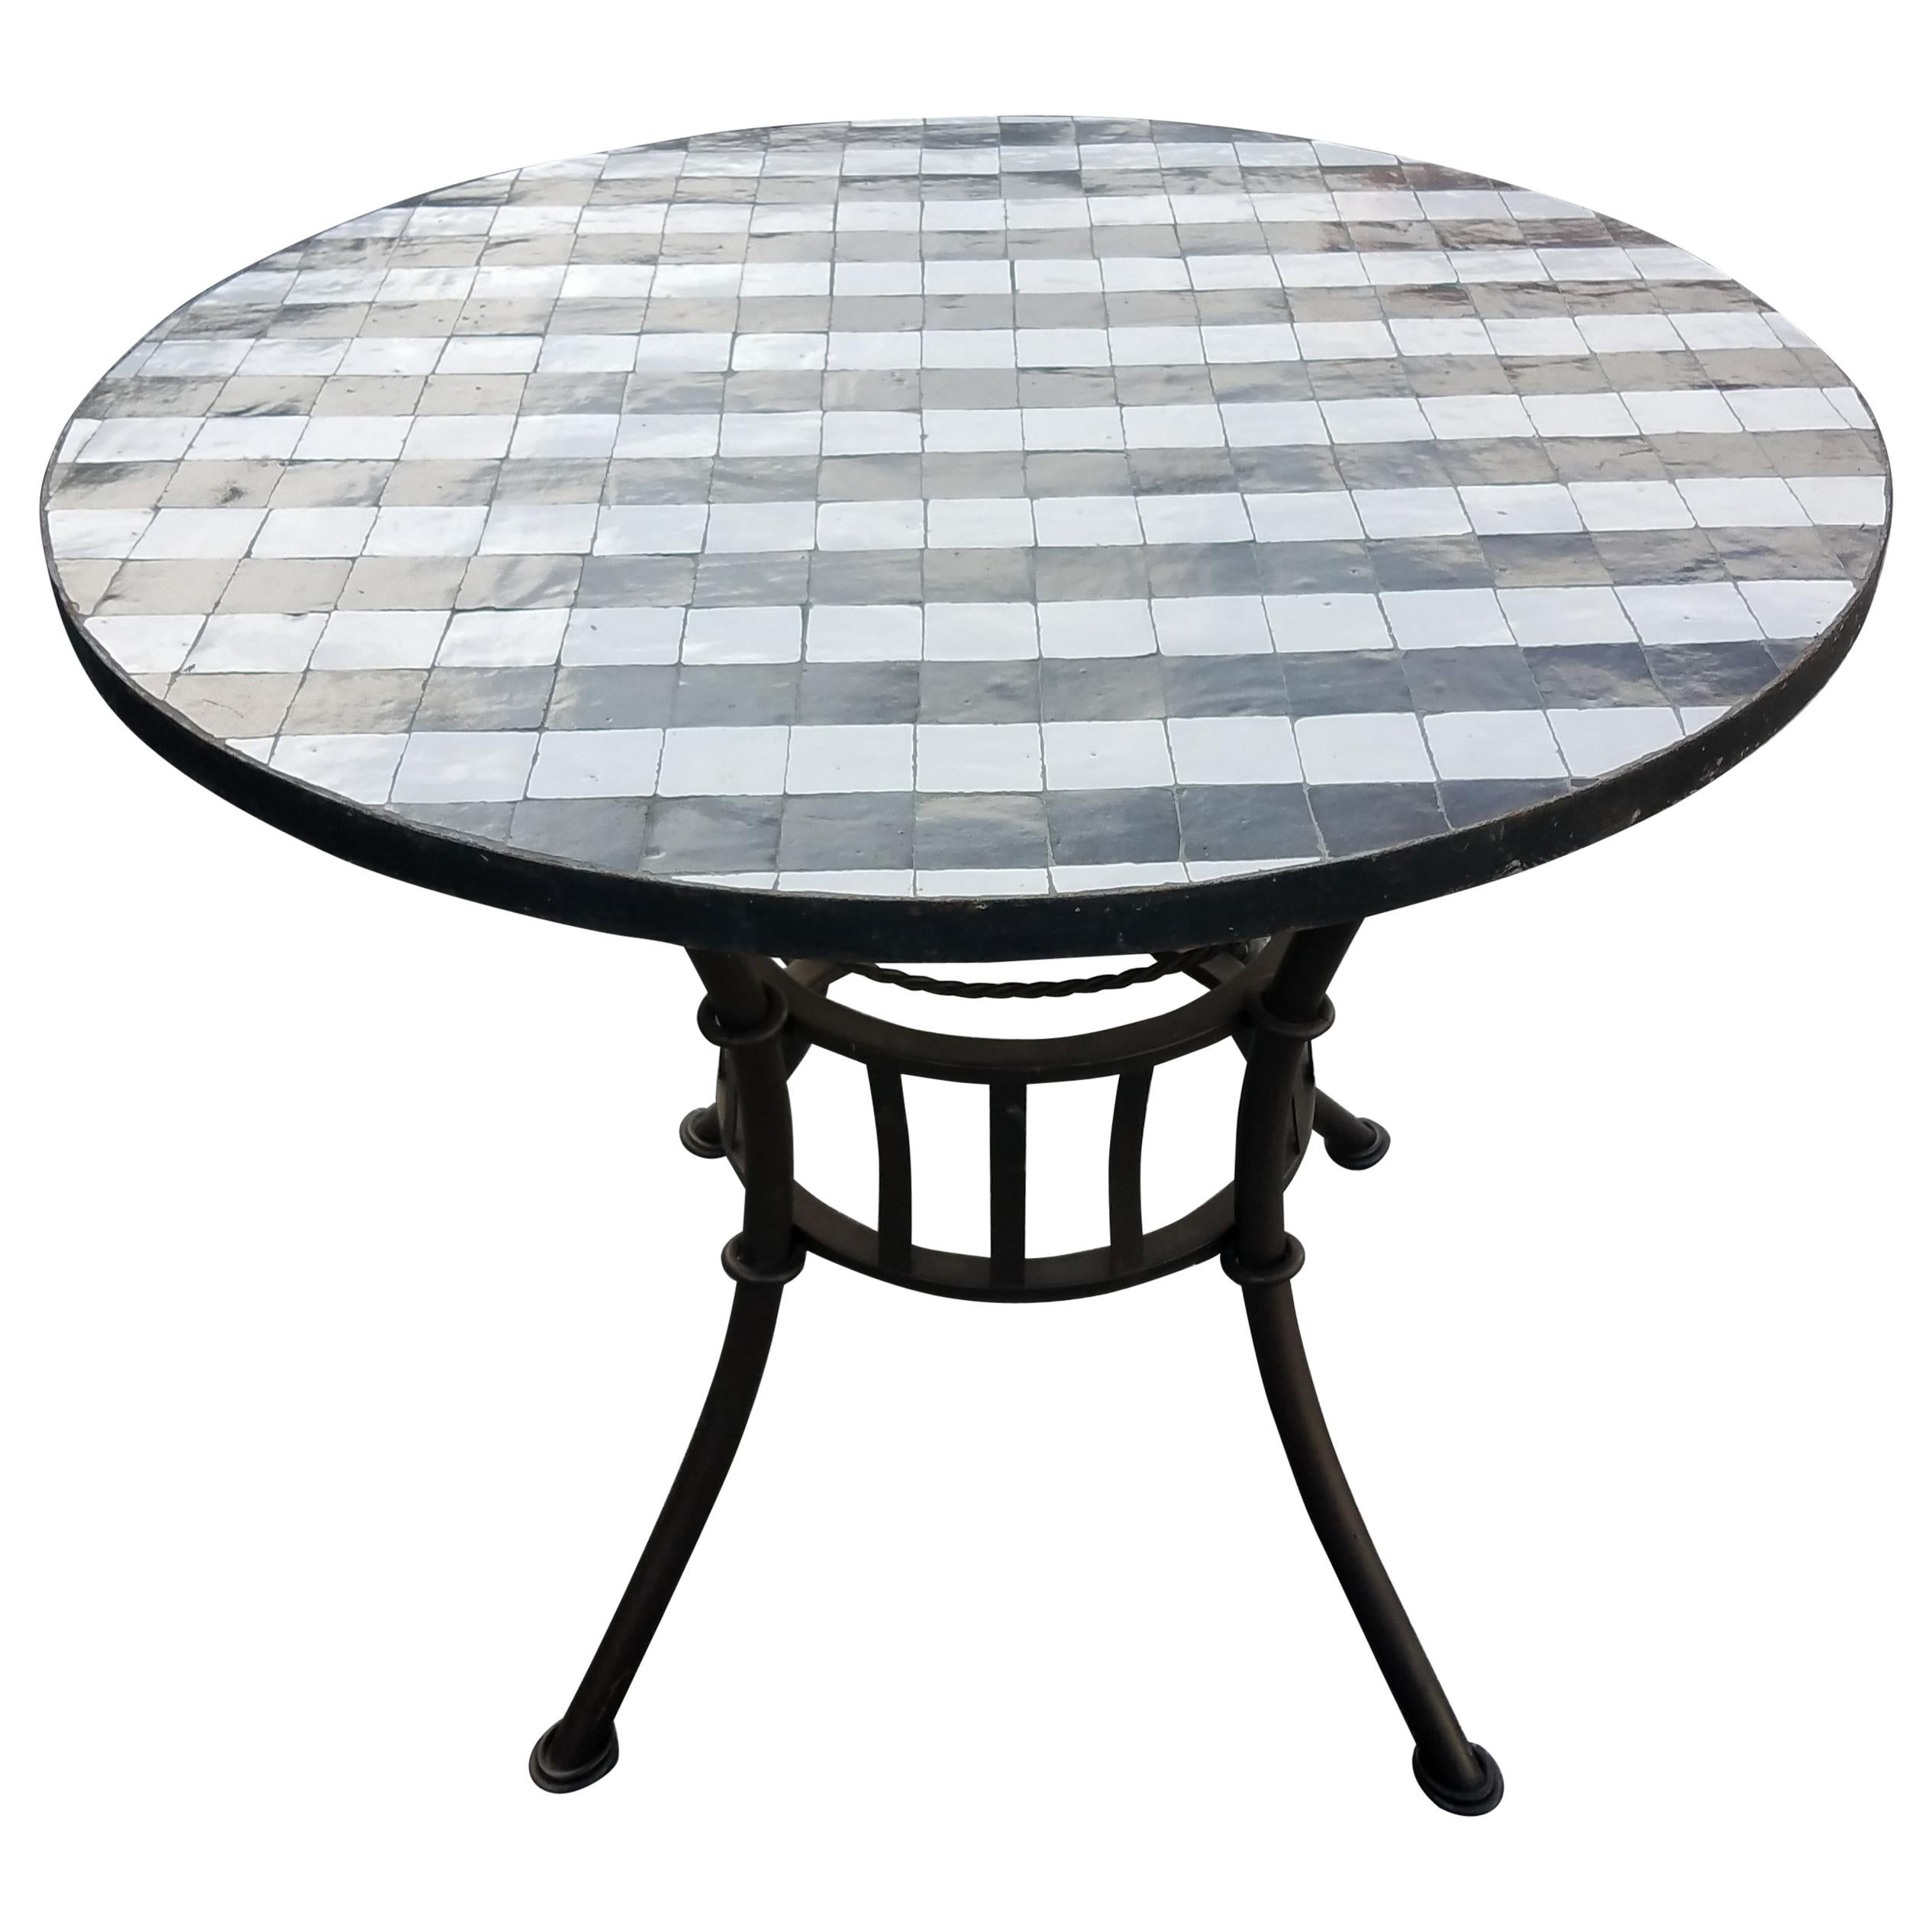 Black or White Moroccan Mosaic Table, Choose Your Base For Sale